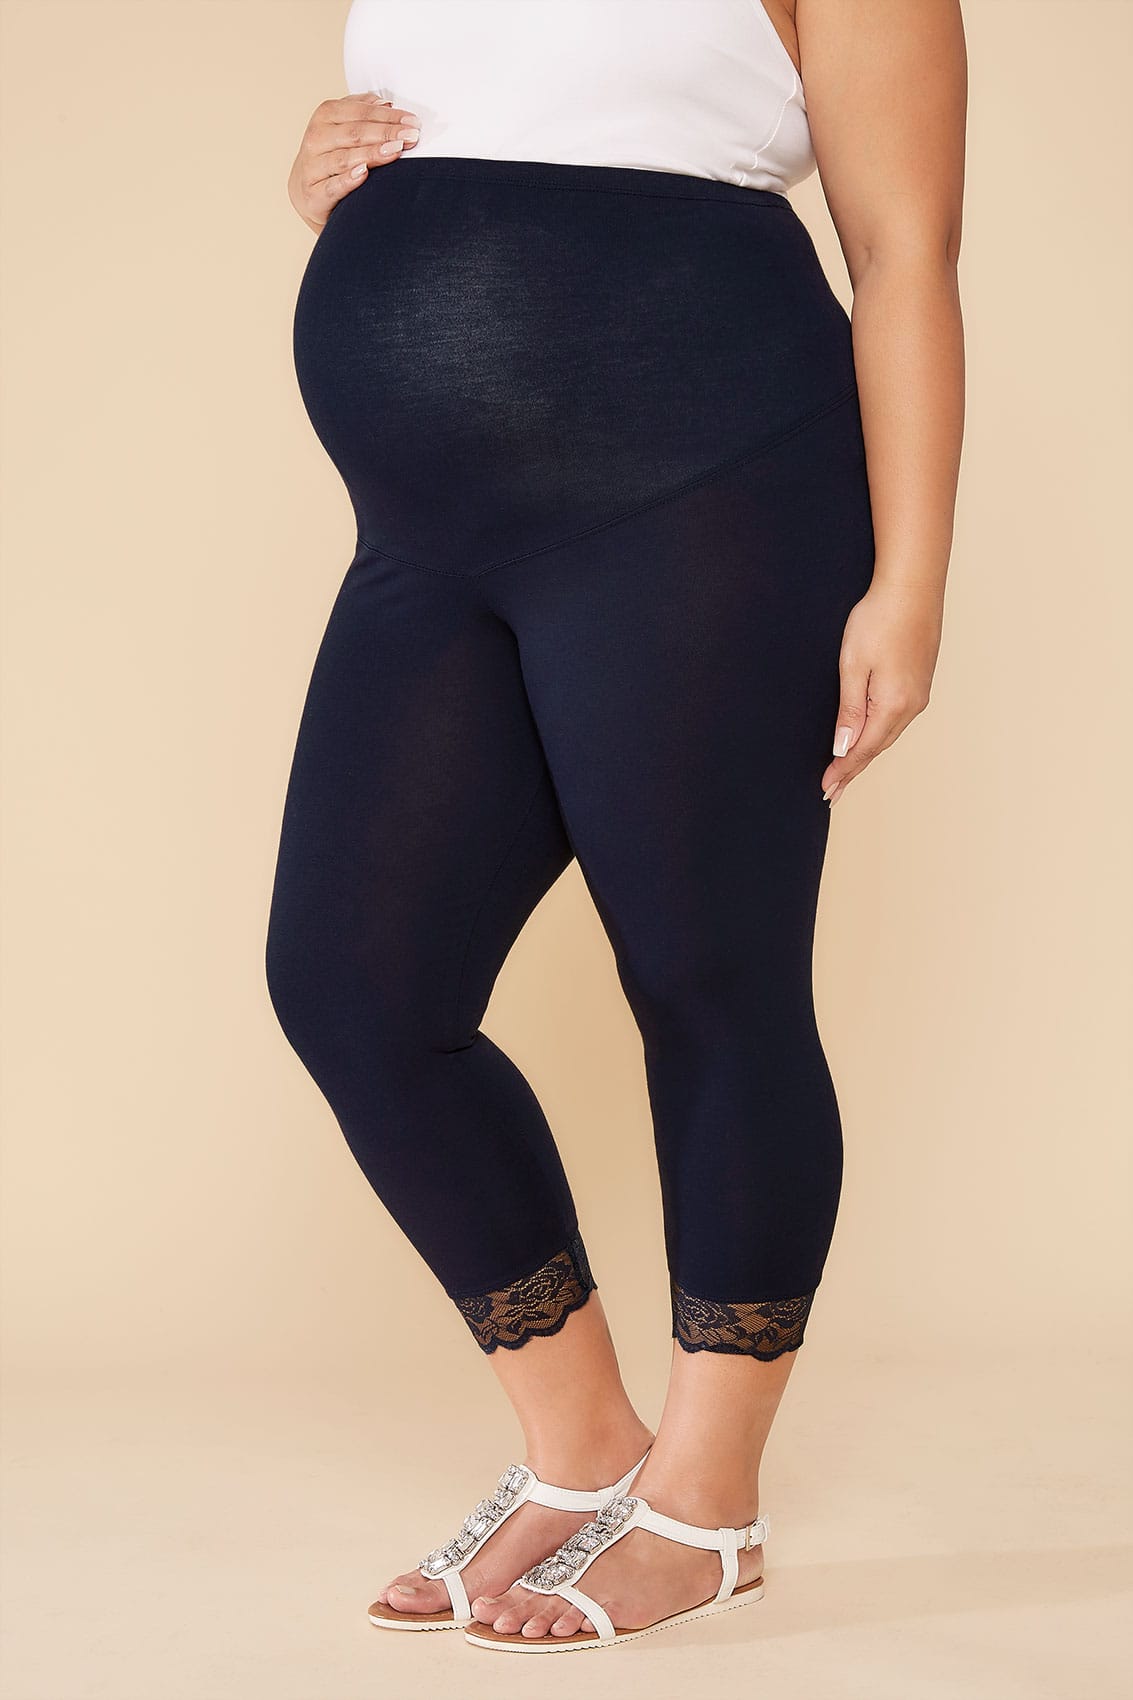 BUMP IT UP MATERNITY Black Cotton Essential Leggings With Comfort Panel Plus  Size 16 to 32